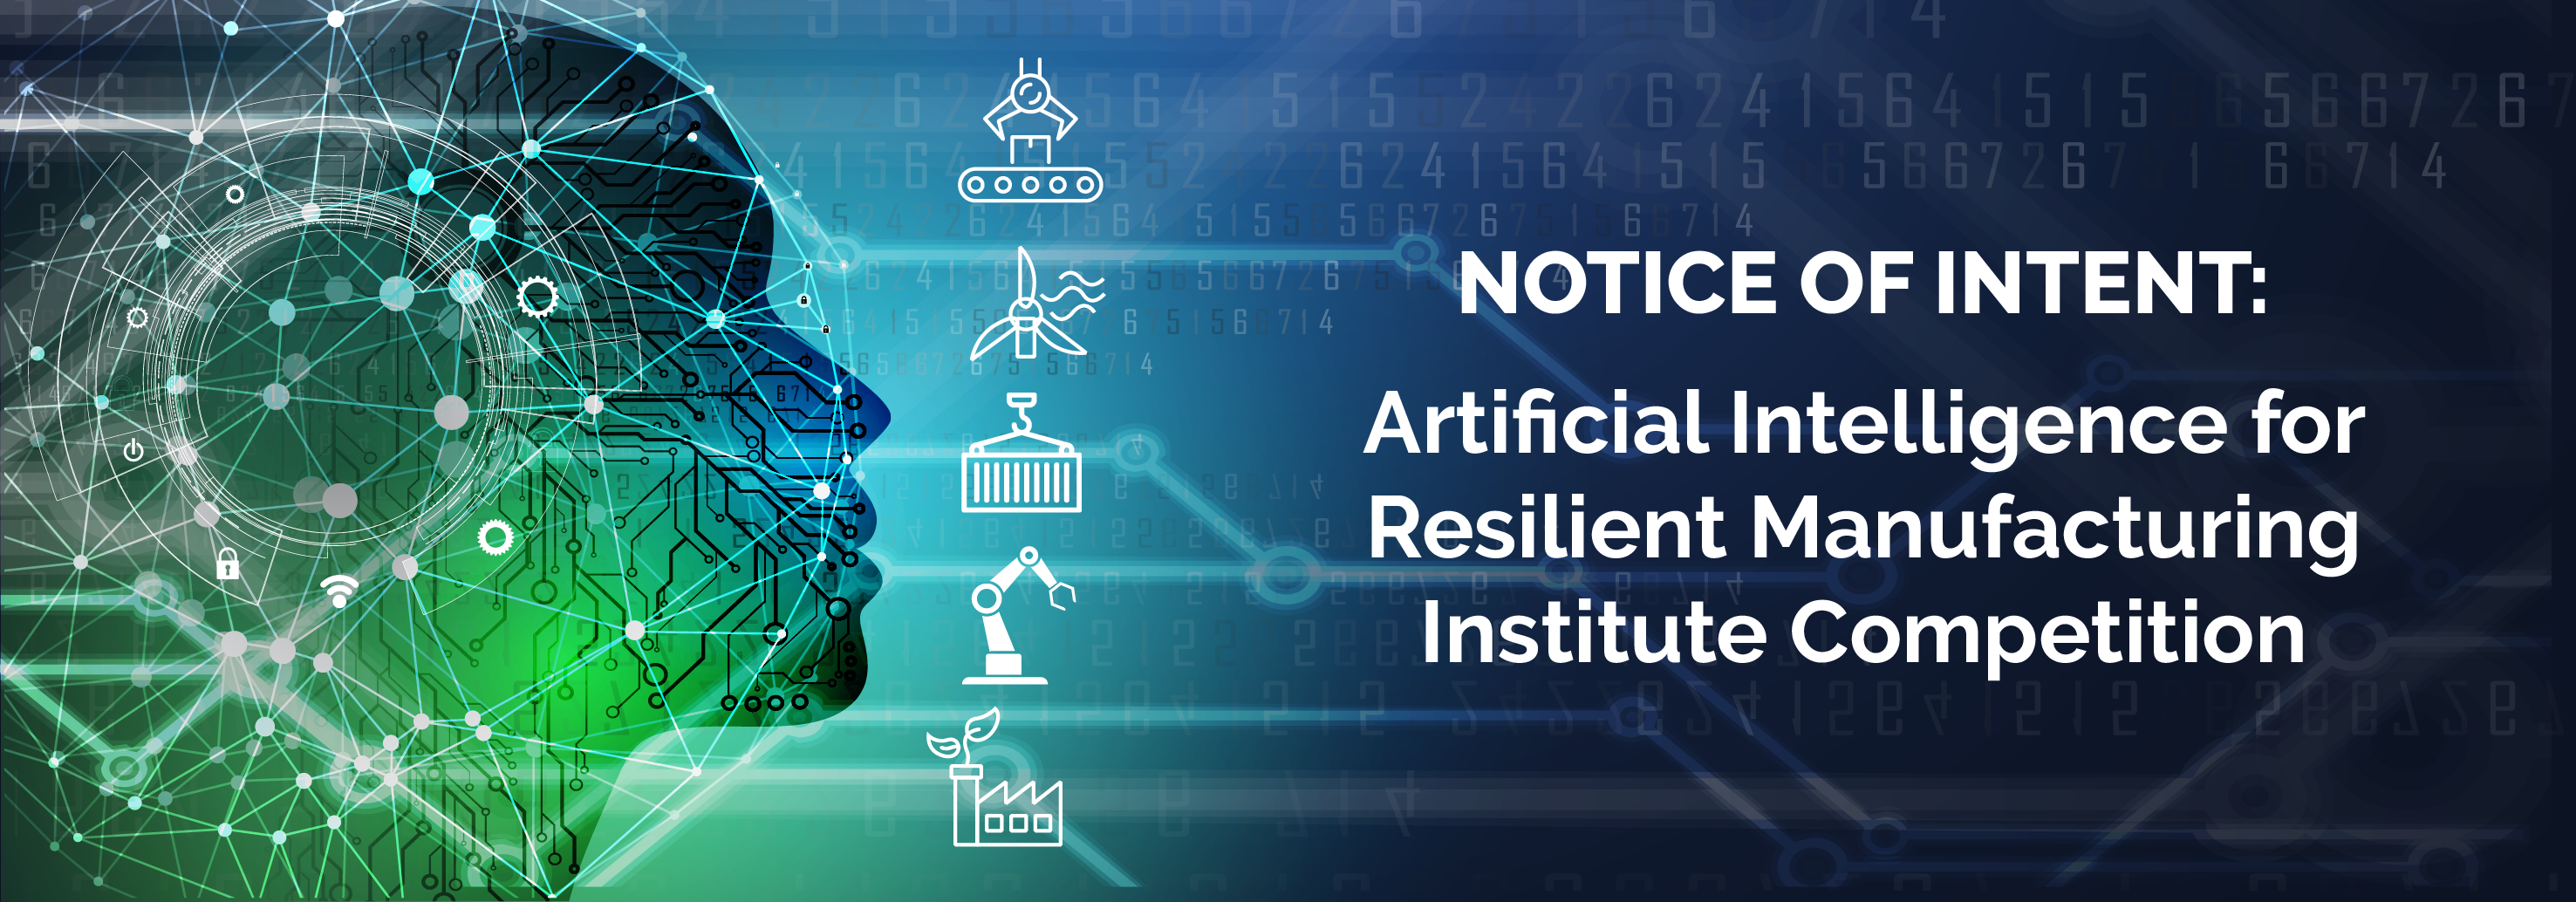 Graphic depicting artificial intelligence and technology. Text reads: "Notice of Intent: Artificial Intelligence for Resilient Manufacturing Institute Competition 